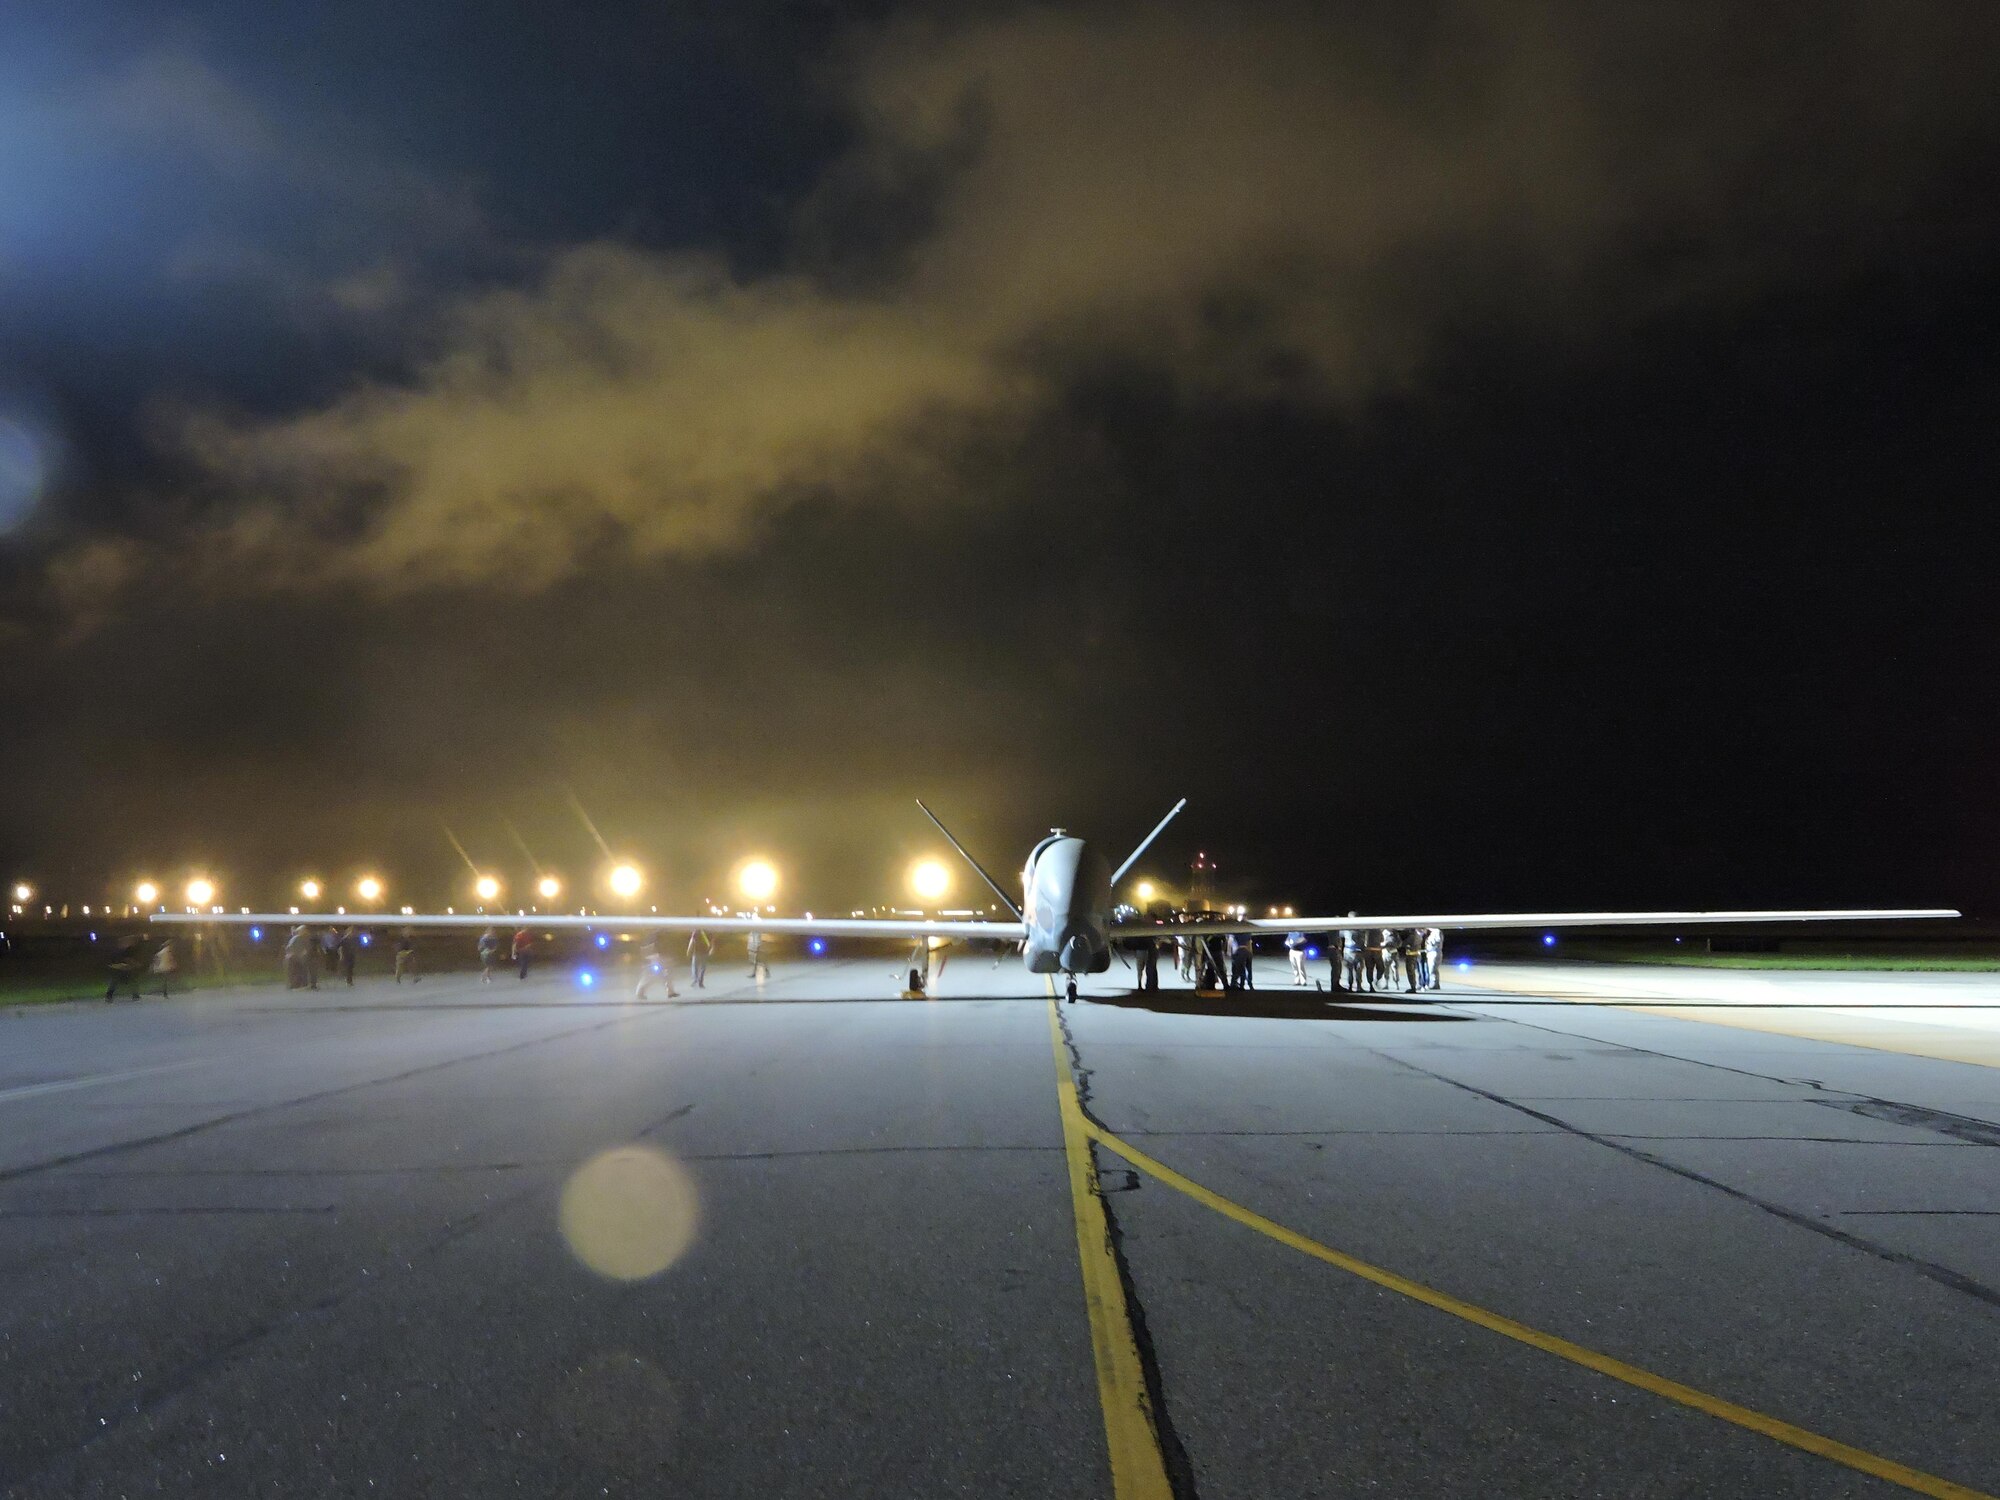 An RQ-4 Global Hawk makes an early morning arrival at Robins AFB, Ga. May 24, 2017. Its arrival marked the first time a Global Hawk has flown into an air logistics complex. (U.S. Air Force photo by Roland Leach)